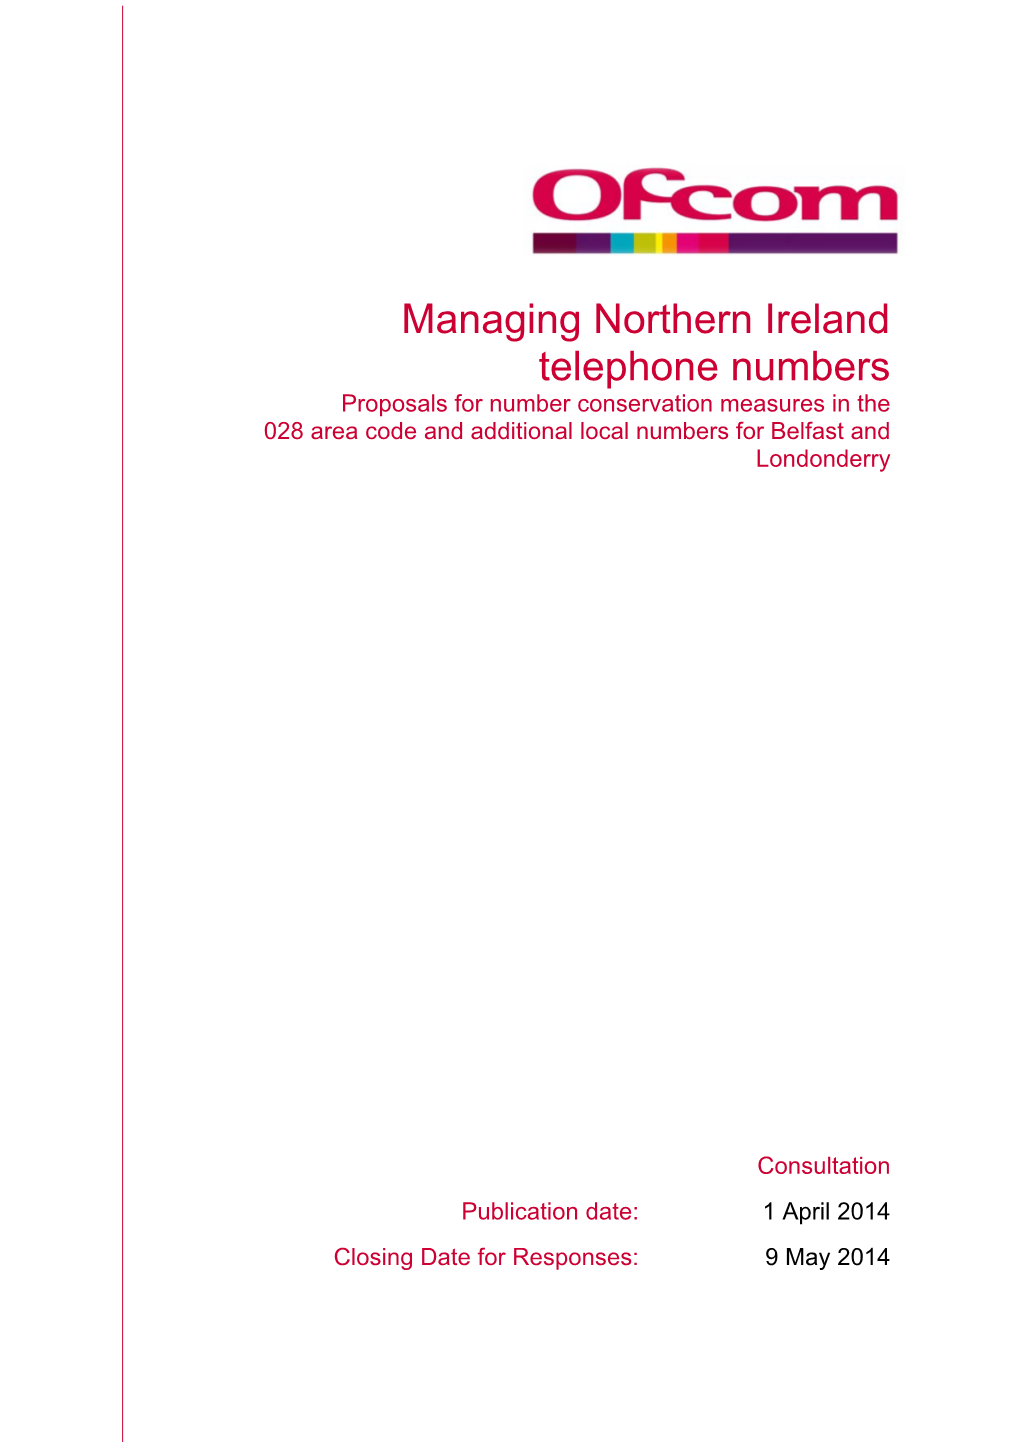 Managing Northern Ireland Telephone Numbers Proposals for Number Conservation Measures in the 028 Area Code and Additional Local Numbers for Belfast and Londonderry